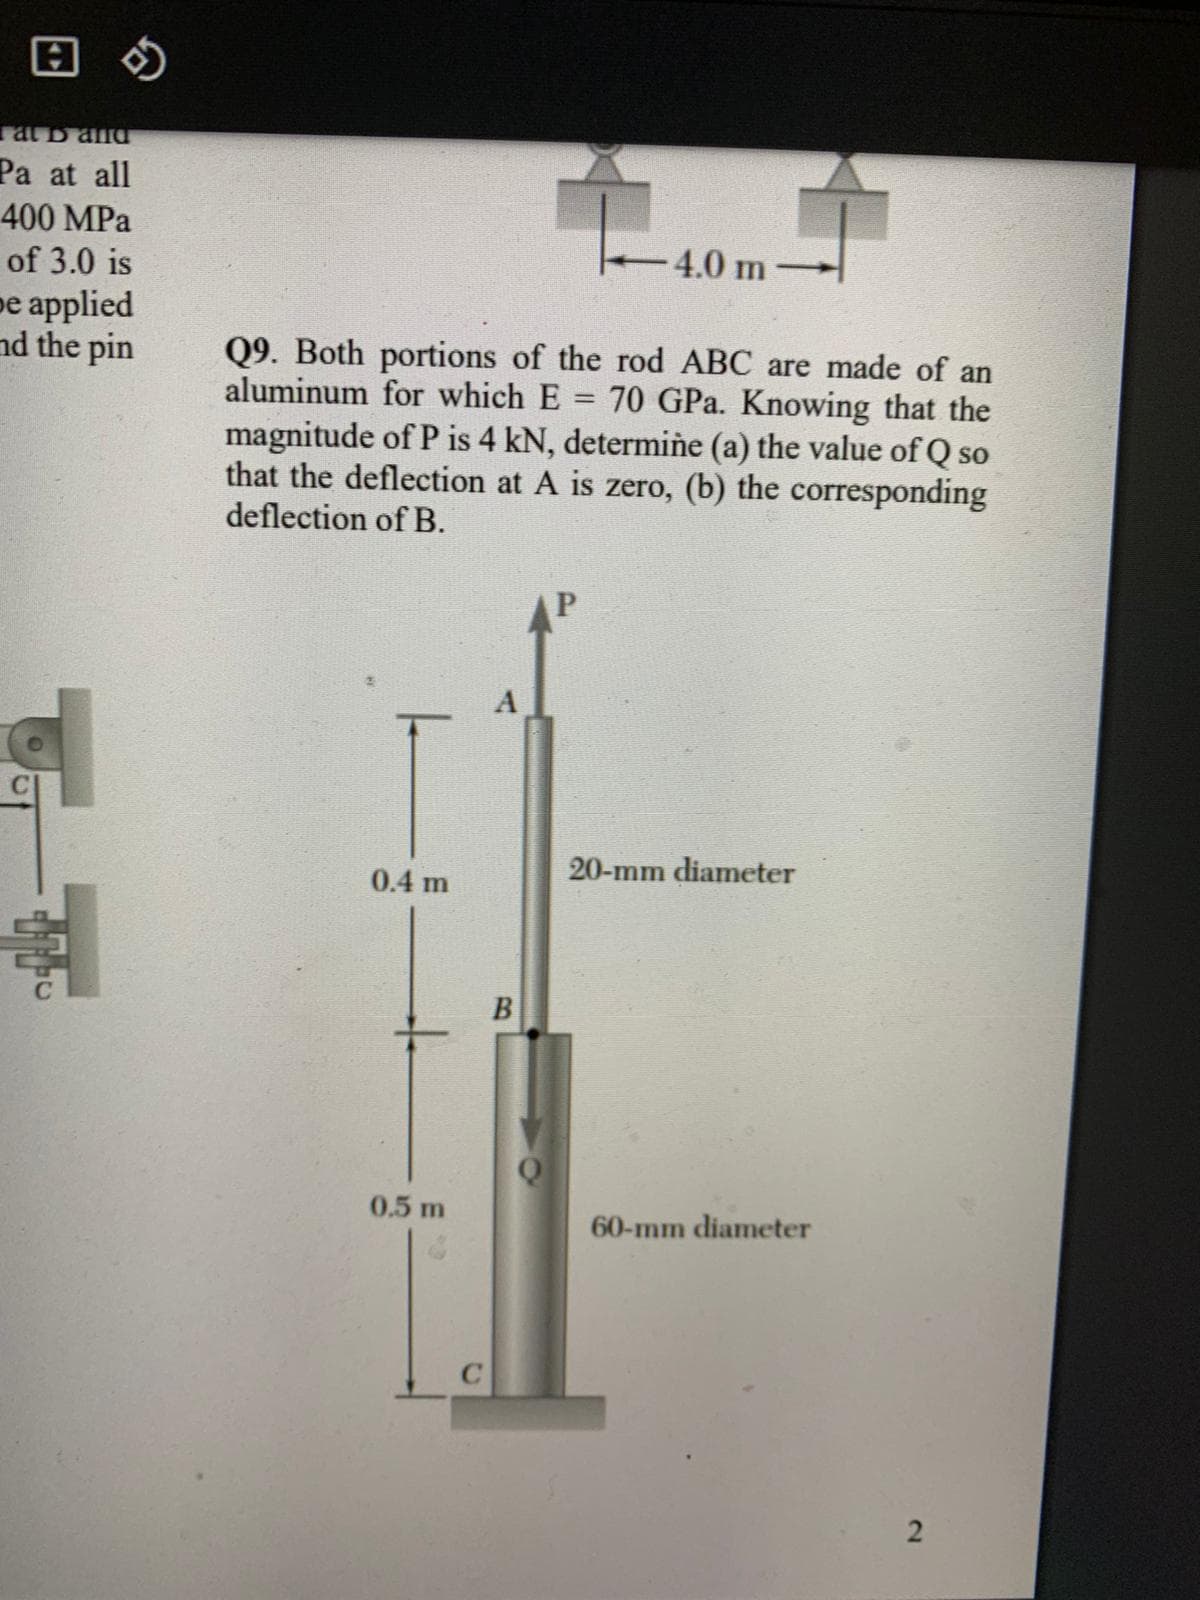 回の
at D ana
Pa at all
400 MPa
of 3.0 is
4.0 m
рe aplied
nd the pin
Q9. Both portions of the rod ABC are made of an
aluminum for which E = 70 GPa. Knowing that the
magnitude of P is 4 kN, determiñe (a) the value of Q so
that the deflection at A is zero, (b) the corresponding
deflection of B.
20-mm diameter
0.4 m
0.5 m
60-mm diameter
2.
